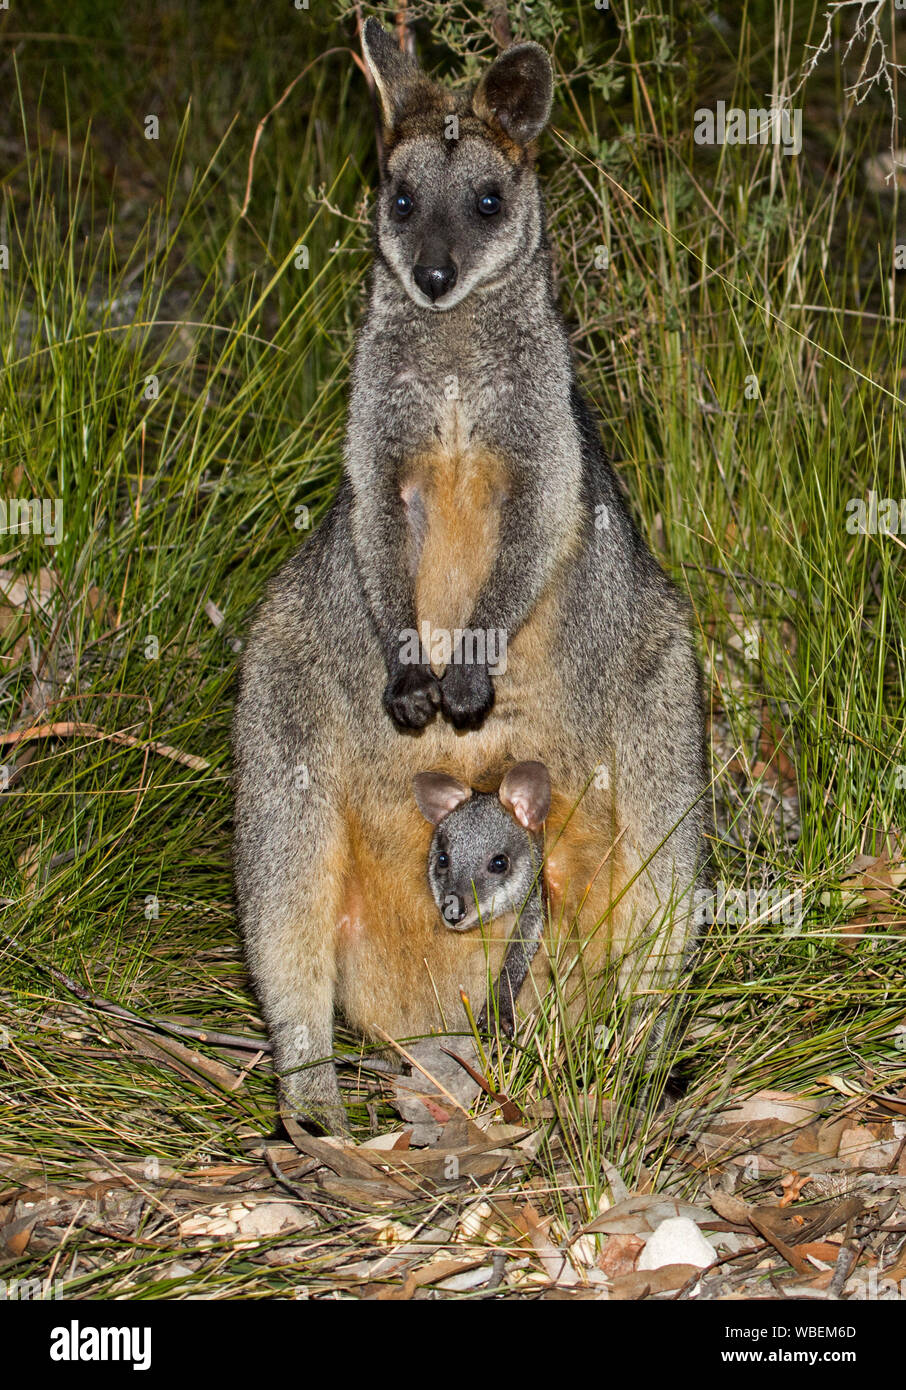 Beautiful swamp wallaby, Wallabia bicolour, with joey peering from pouch, both staring at camera from among tall grasses, in the wild in Australia Stock Photo